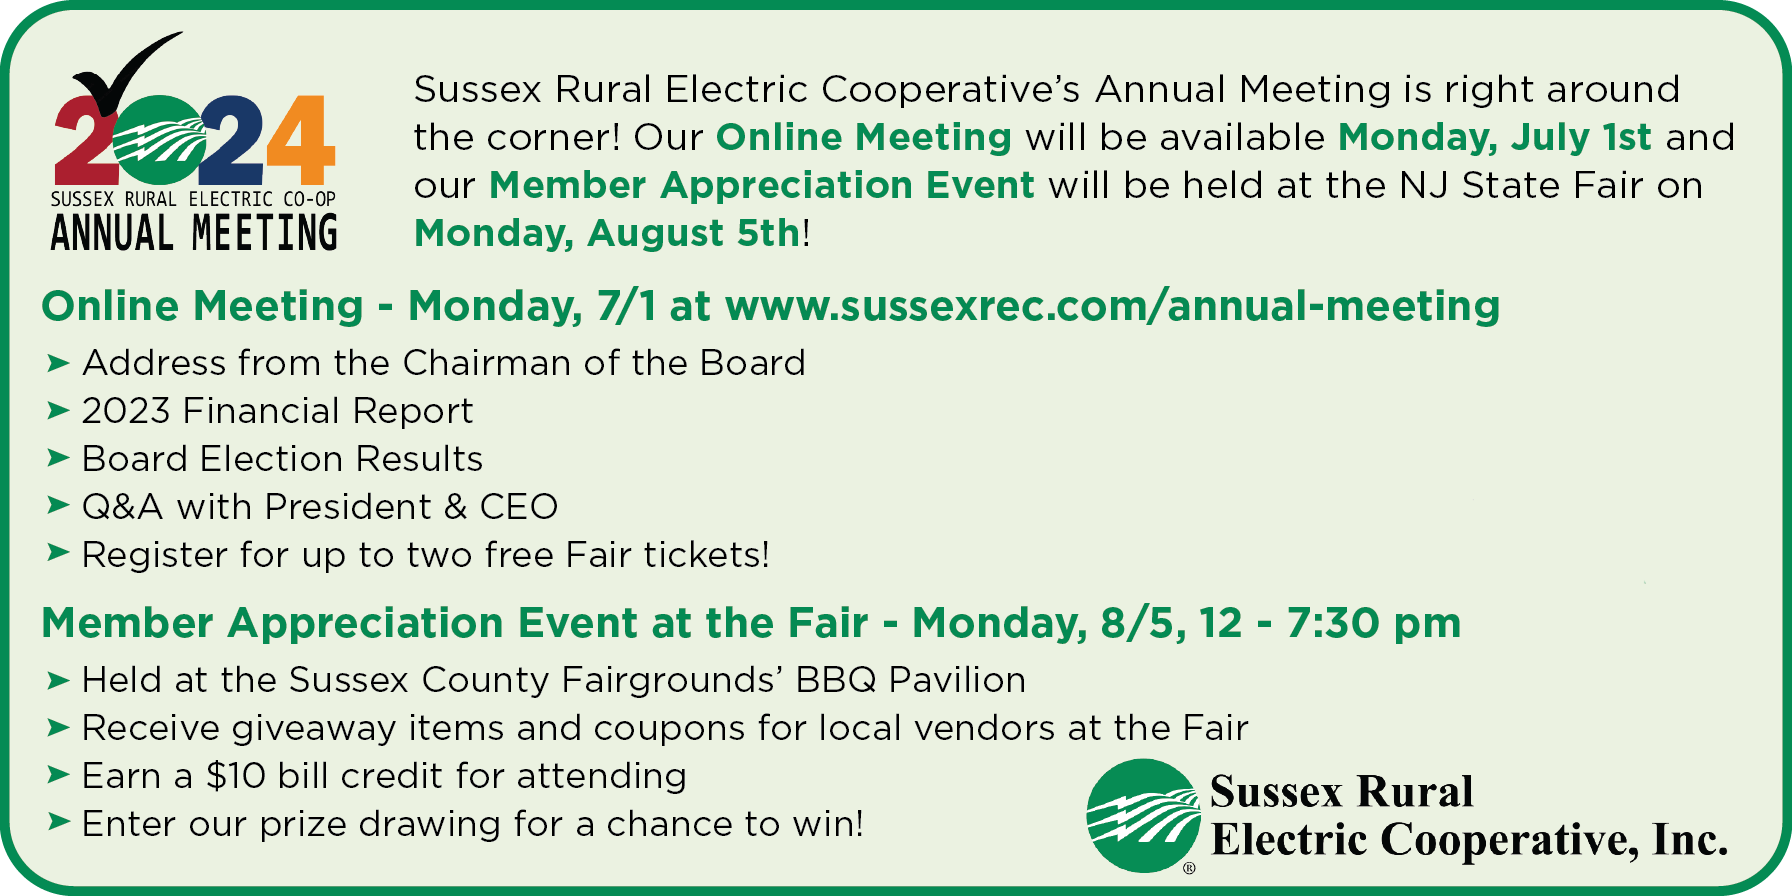 2024 Sussex Rural Electric Co-op Annual Meeting: Sussex Rural Electric Cooperative's Annual Meeting is right around the corner! Our Online Meeting will be available Monday, July 1st and our Member Appreciation Event will be held at the NJ State Fair on Monday, August 5th! | Online Meeting - Monday, 7/1 at www.sussexrec.com/annual-meeting >Address from the Chairman of the Board >2023 Financial Report >Board Election Results >Q&A with President & CEO >Register for up to two free Fair tickets! | Member Appreciation Event at the Fair - Monday, 8/5, 12 - 7:30 pm >Held at the Sussex County Fairgrounds' BBQ Pavilion >Receive giveaway items and coupons for local vendors at the Fair >Earn a $10 bill credit for attending >Enter our prize drawing for a chance to win! - Sussex Rural Electric Cooperative, Inc.